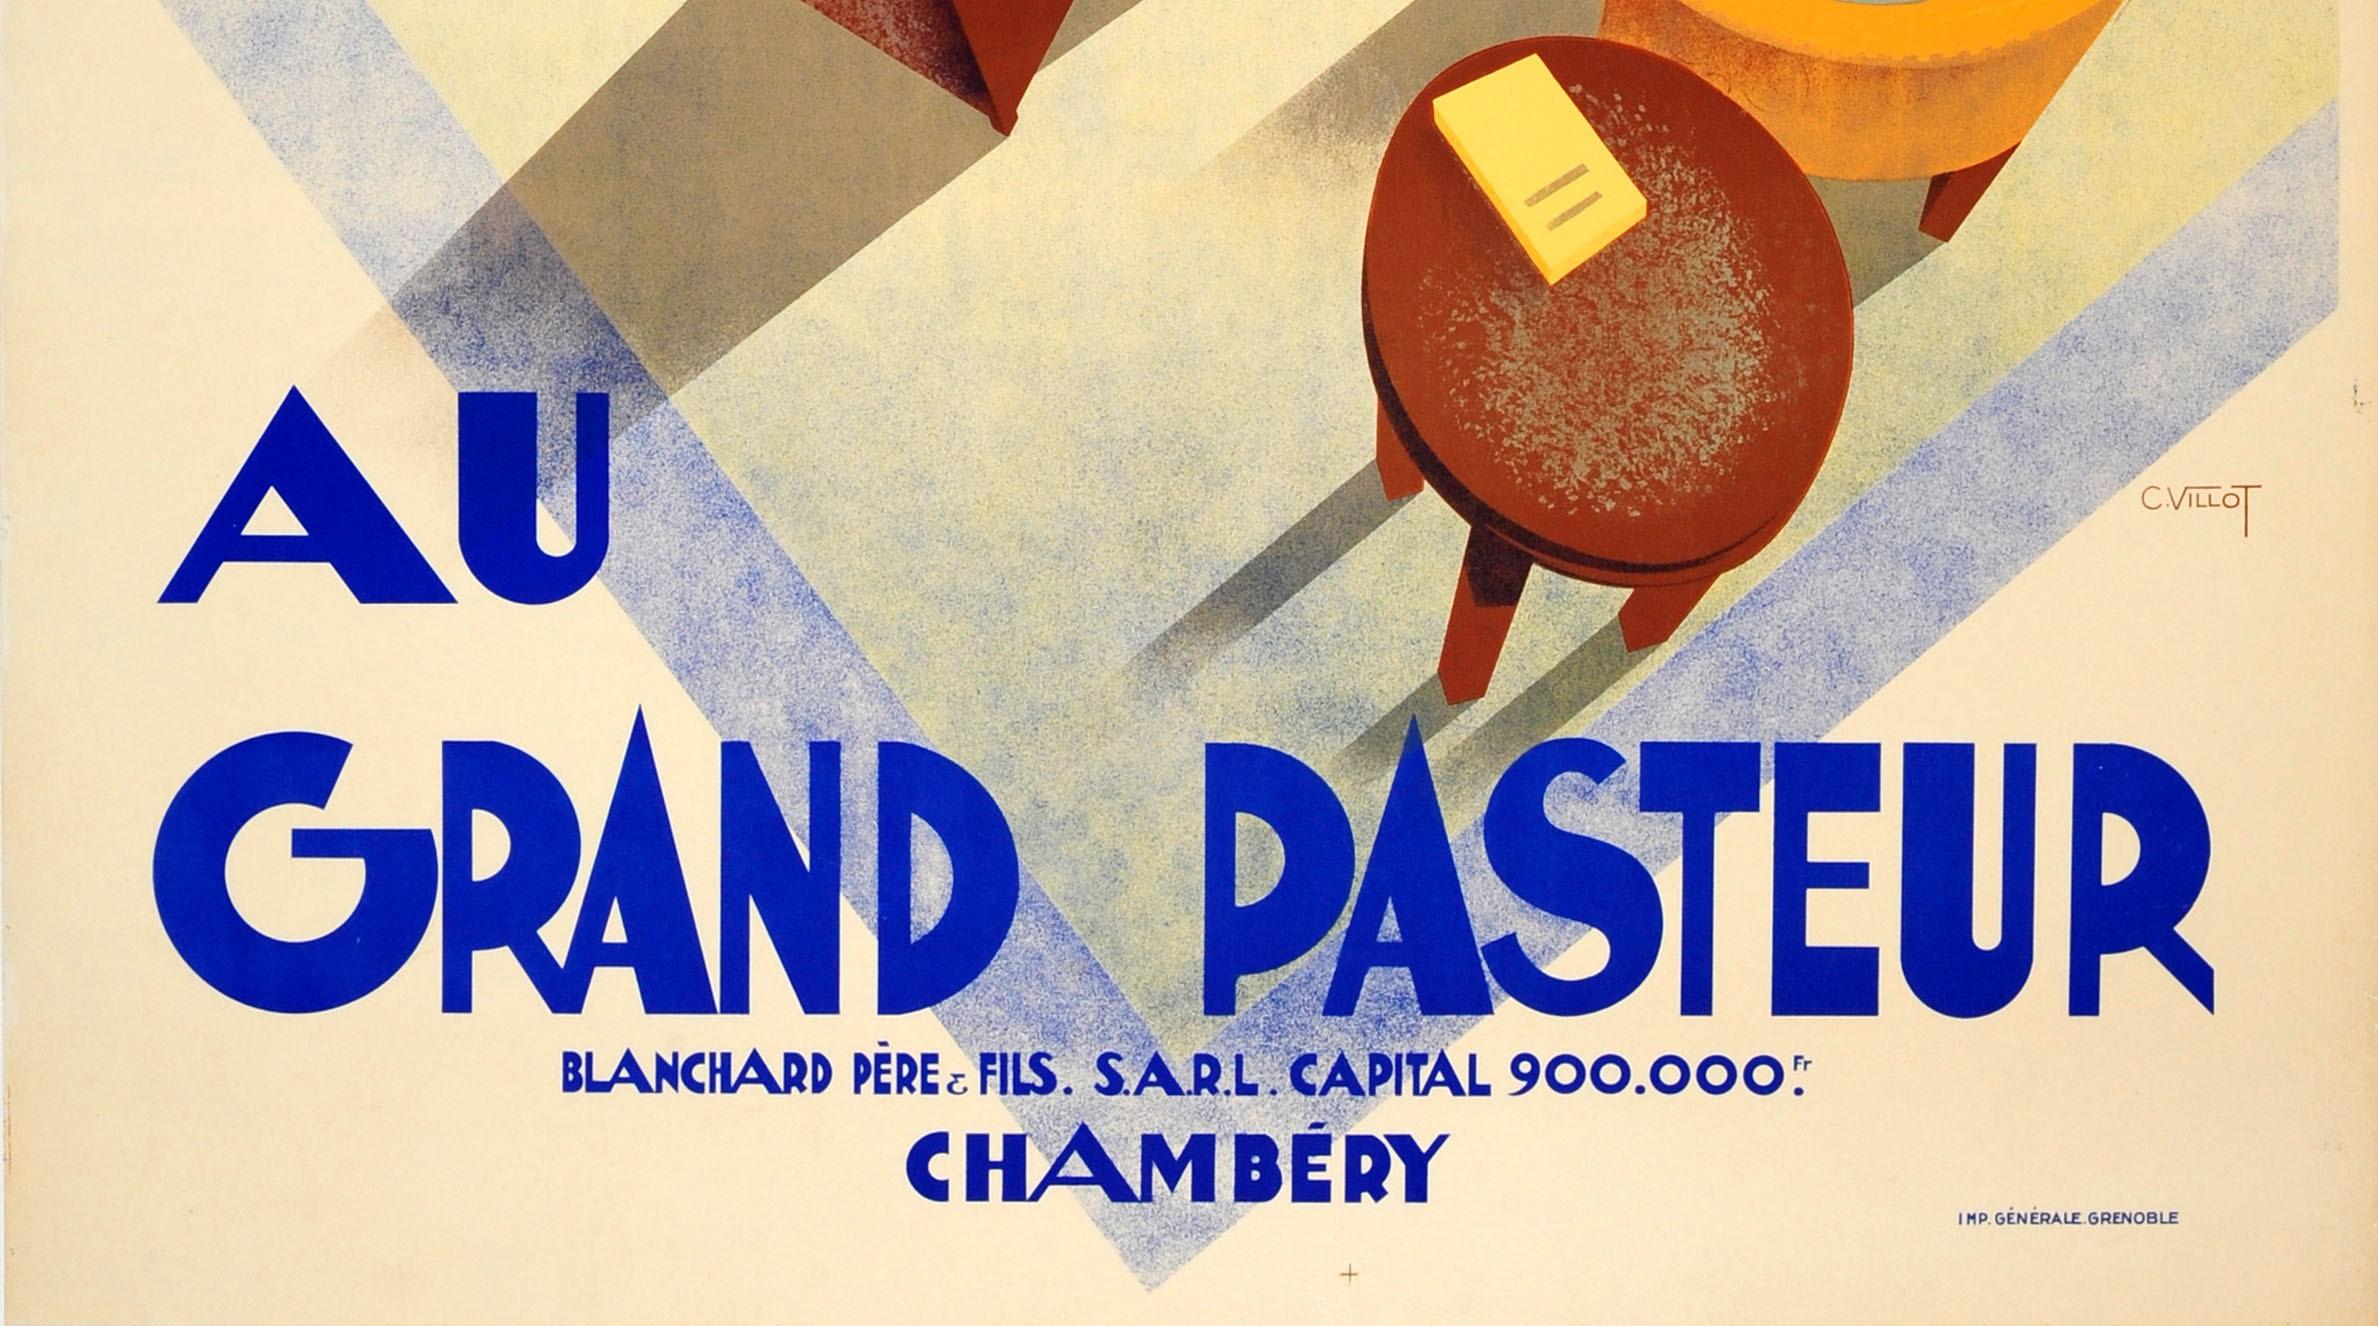 1920s advertising posters